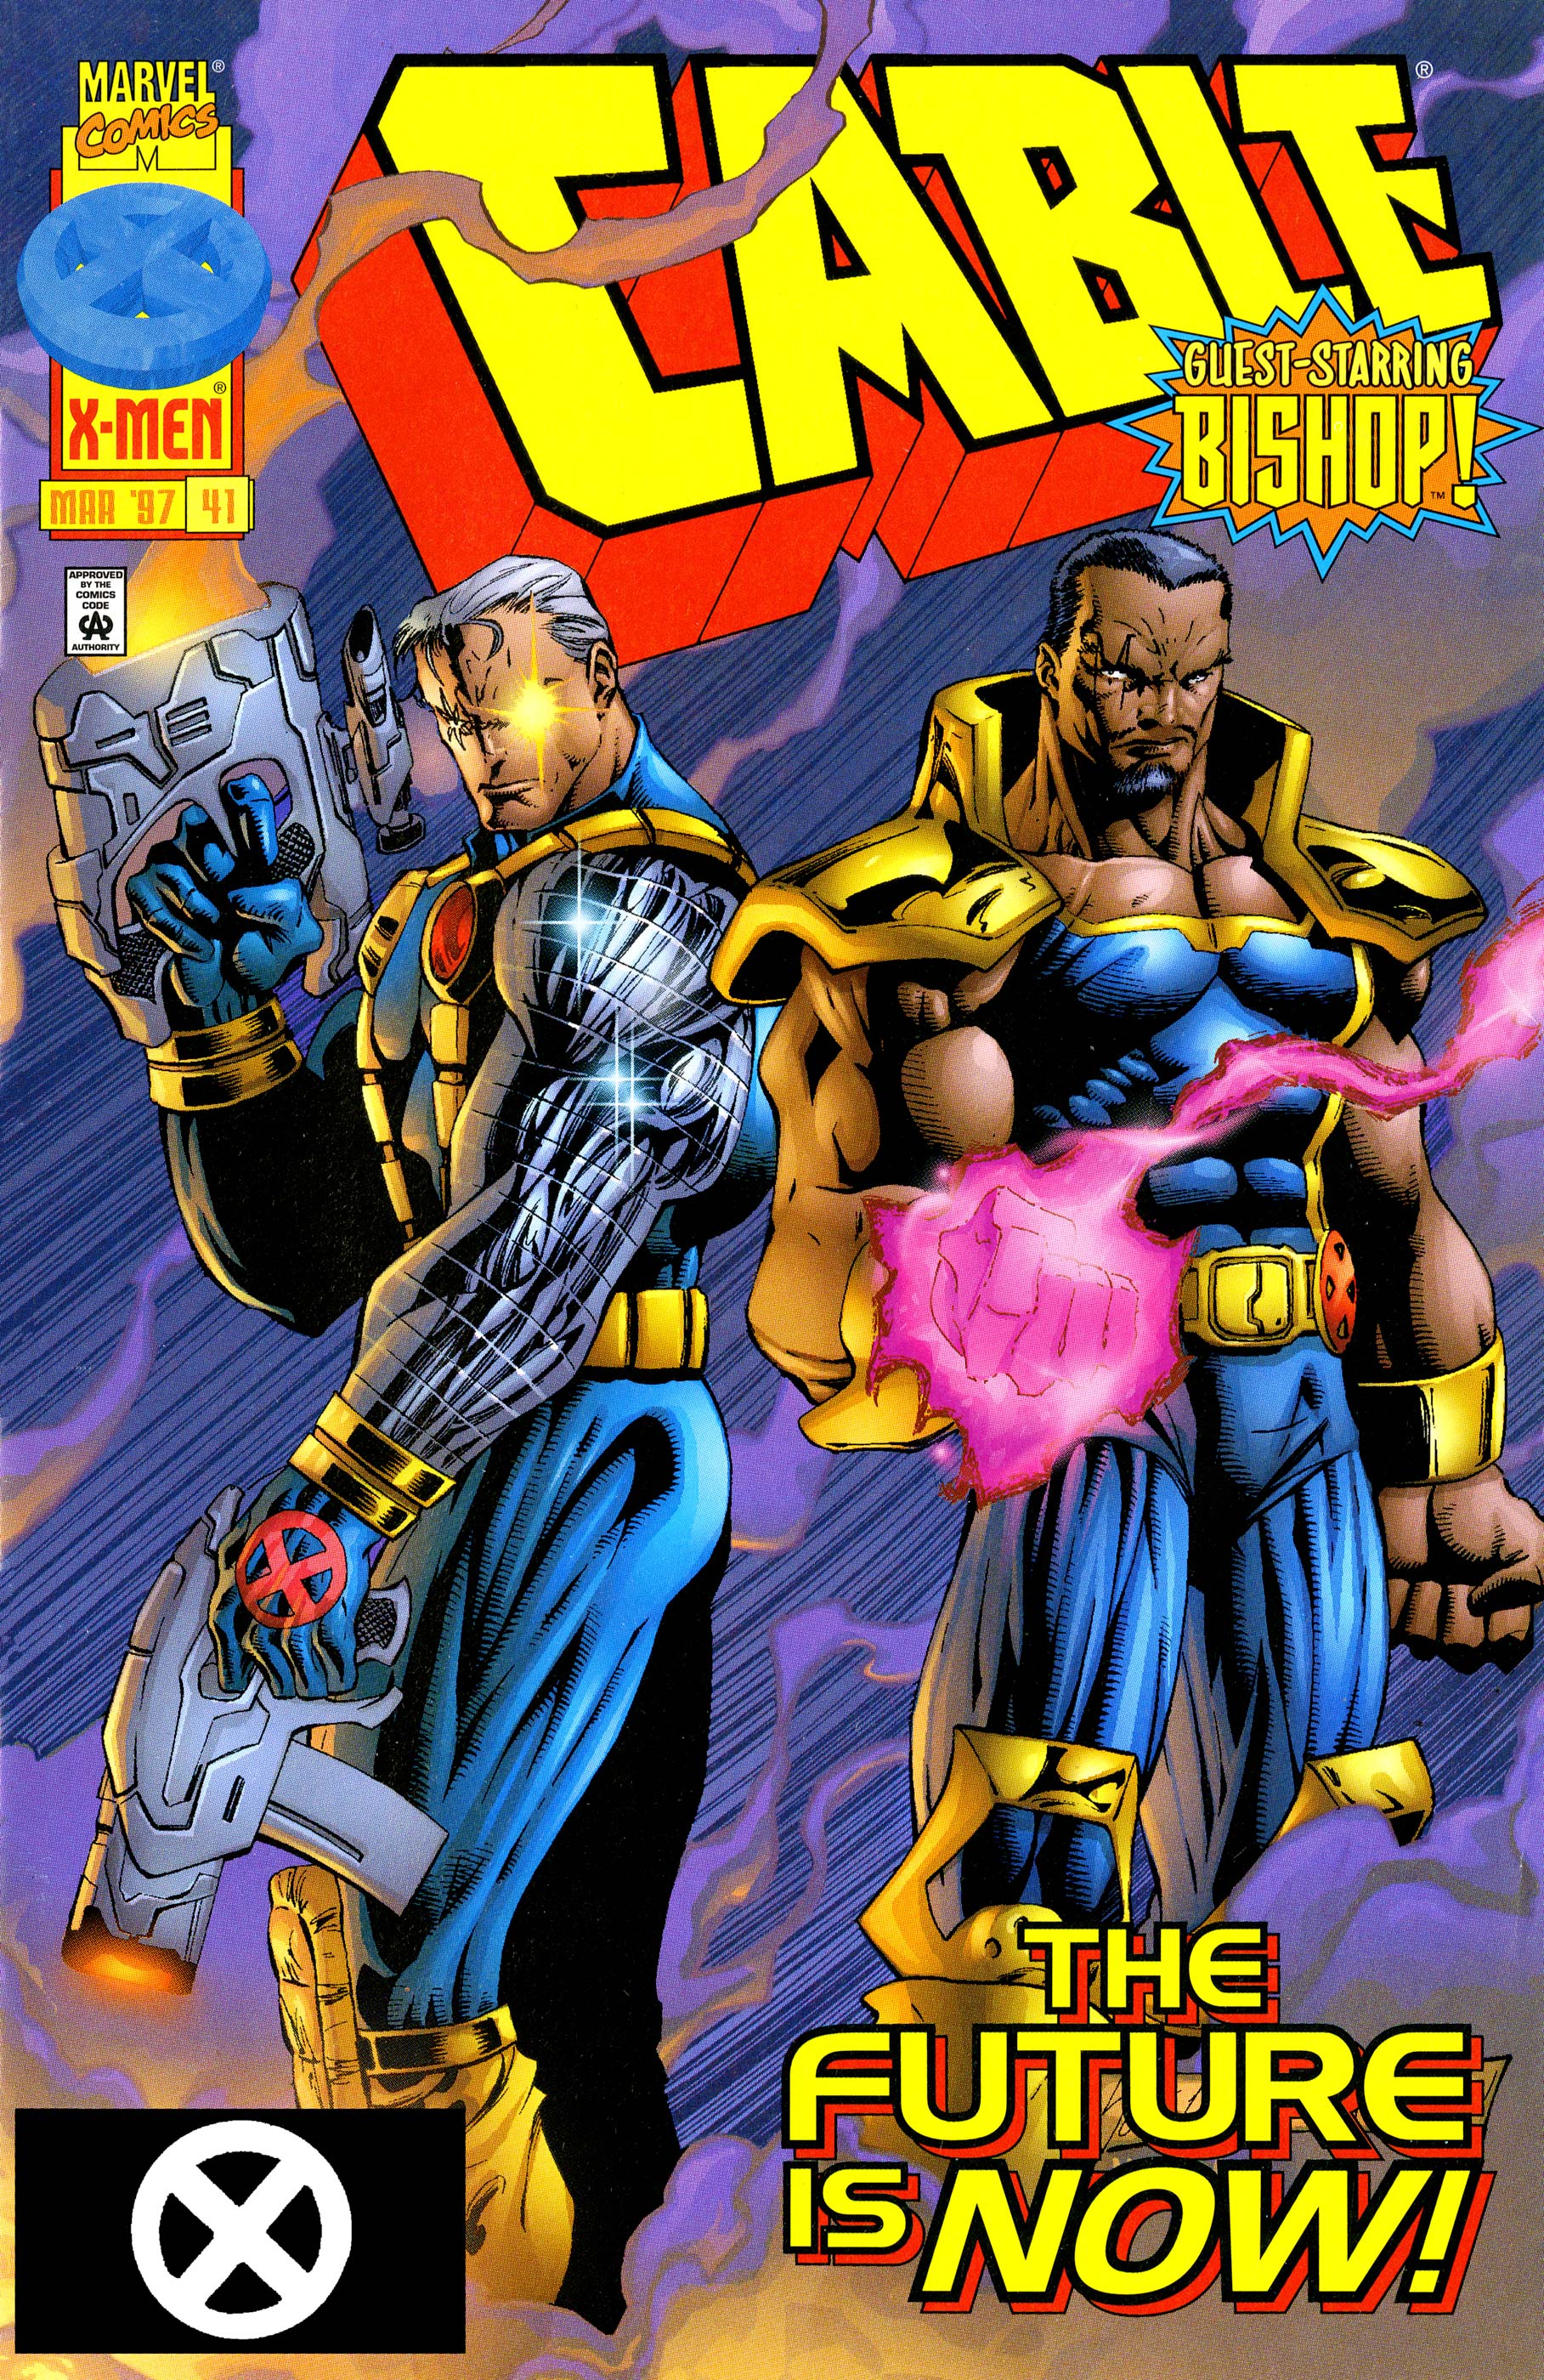 Cable (1993) #41